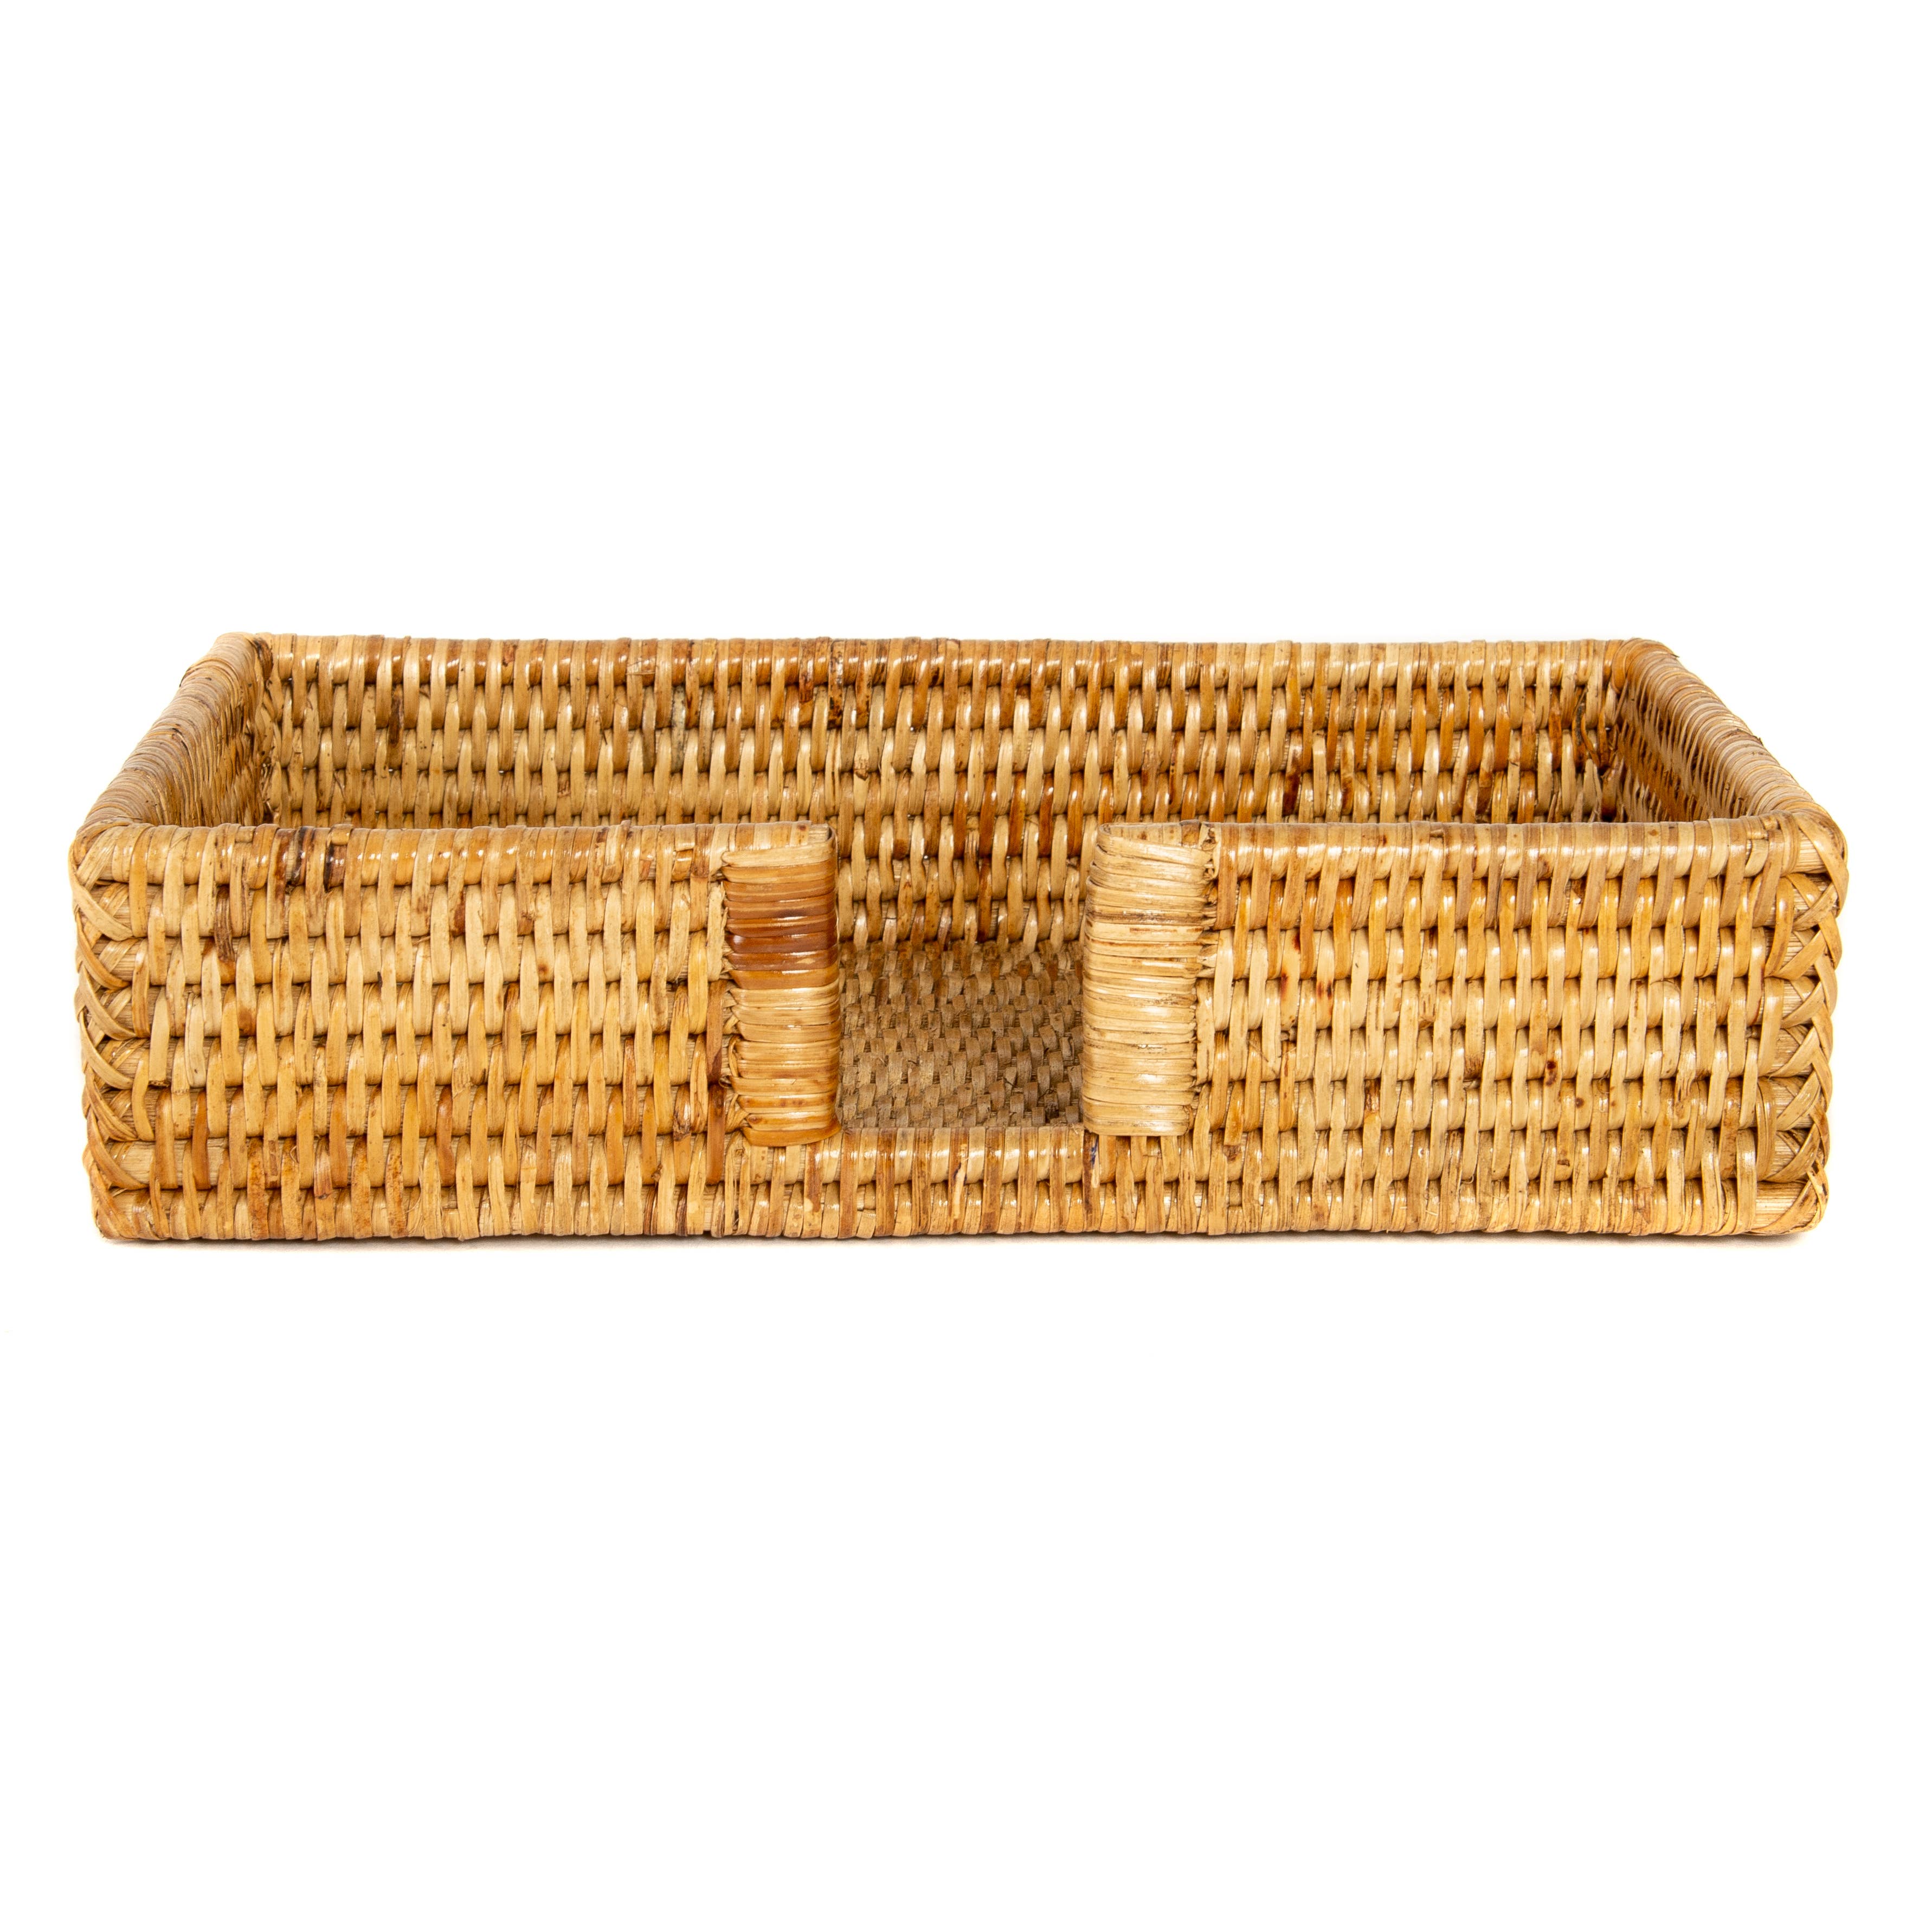 Artifacts Trading Company - Artifacts Rattan Guest Towel/Napkin Holder with Cutout